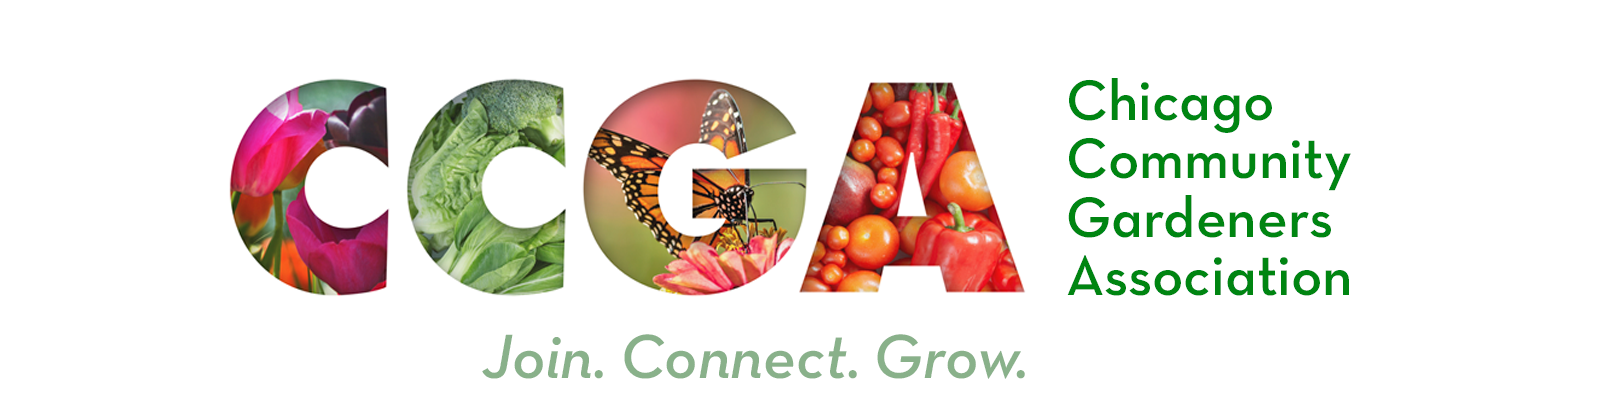 Chicago Community Gardeners Association Learn Connect Grow